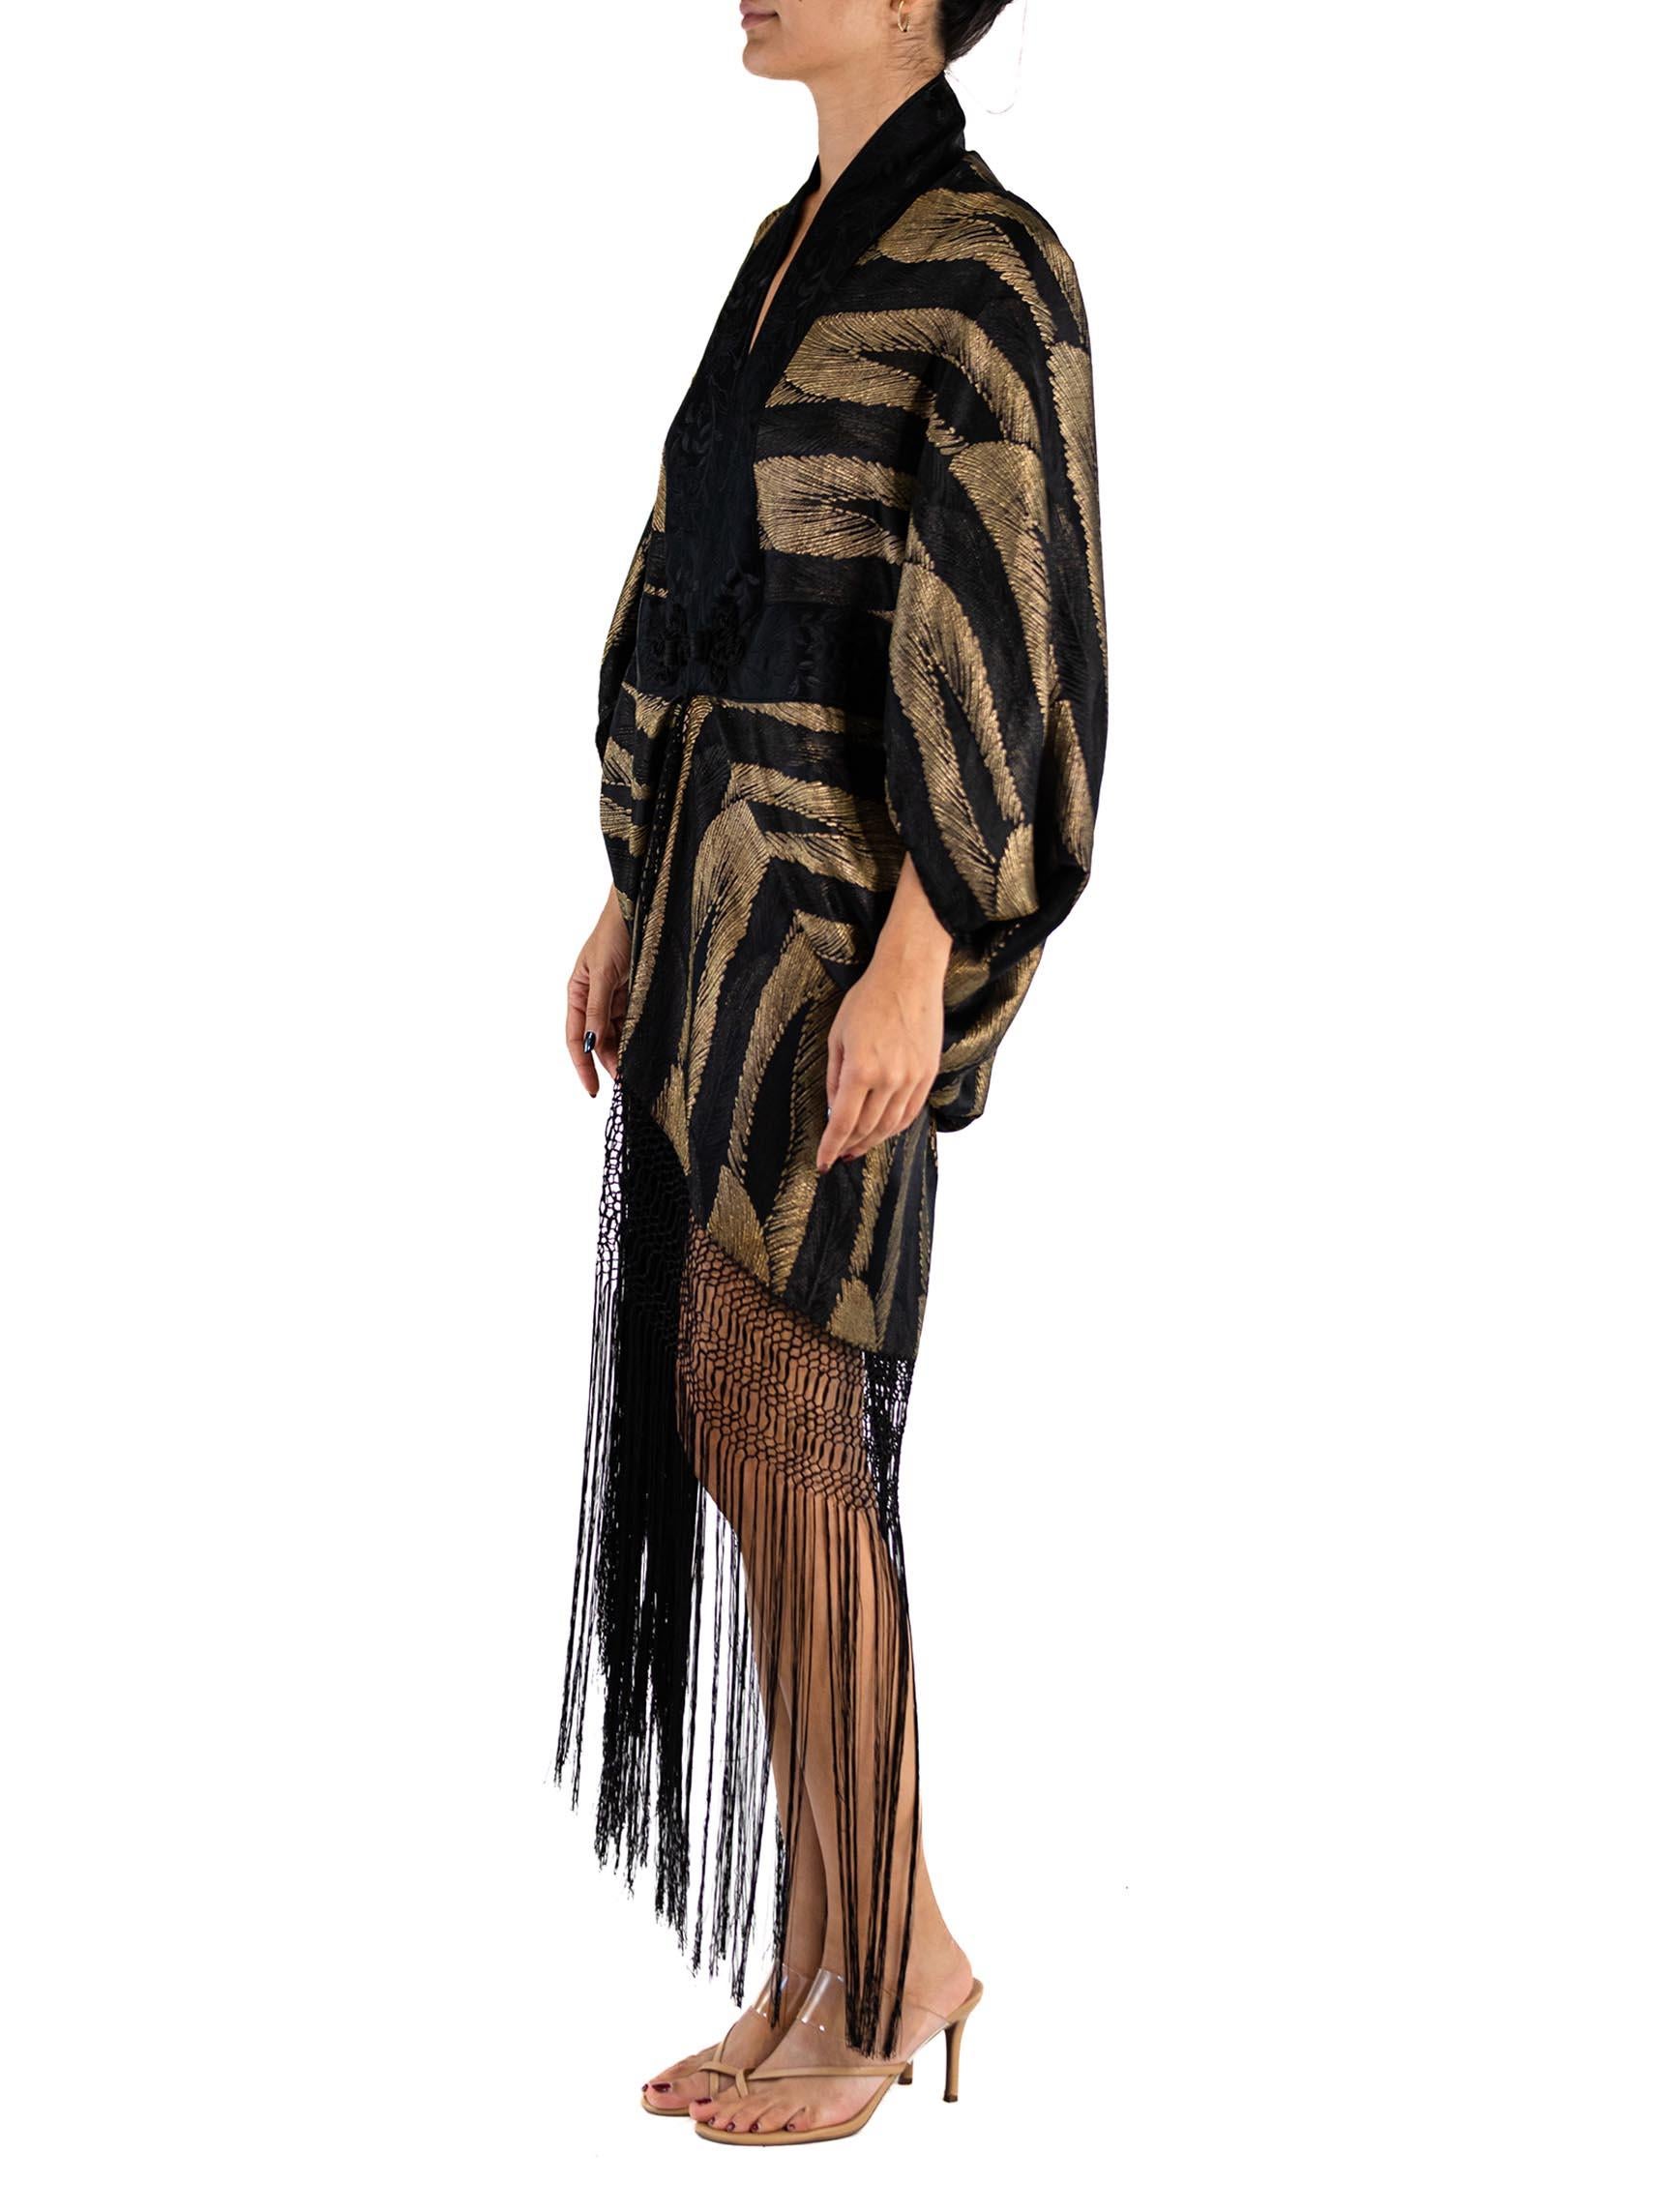 MORPHEW ATELIER Black & Gold Metallic Silk Lamé Cocoon With Fringe And Silver V In New Condition For Sale In New York, NY